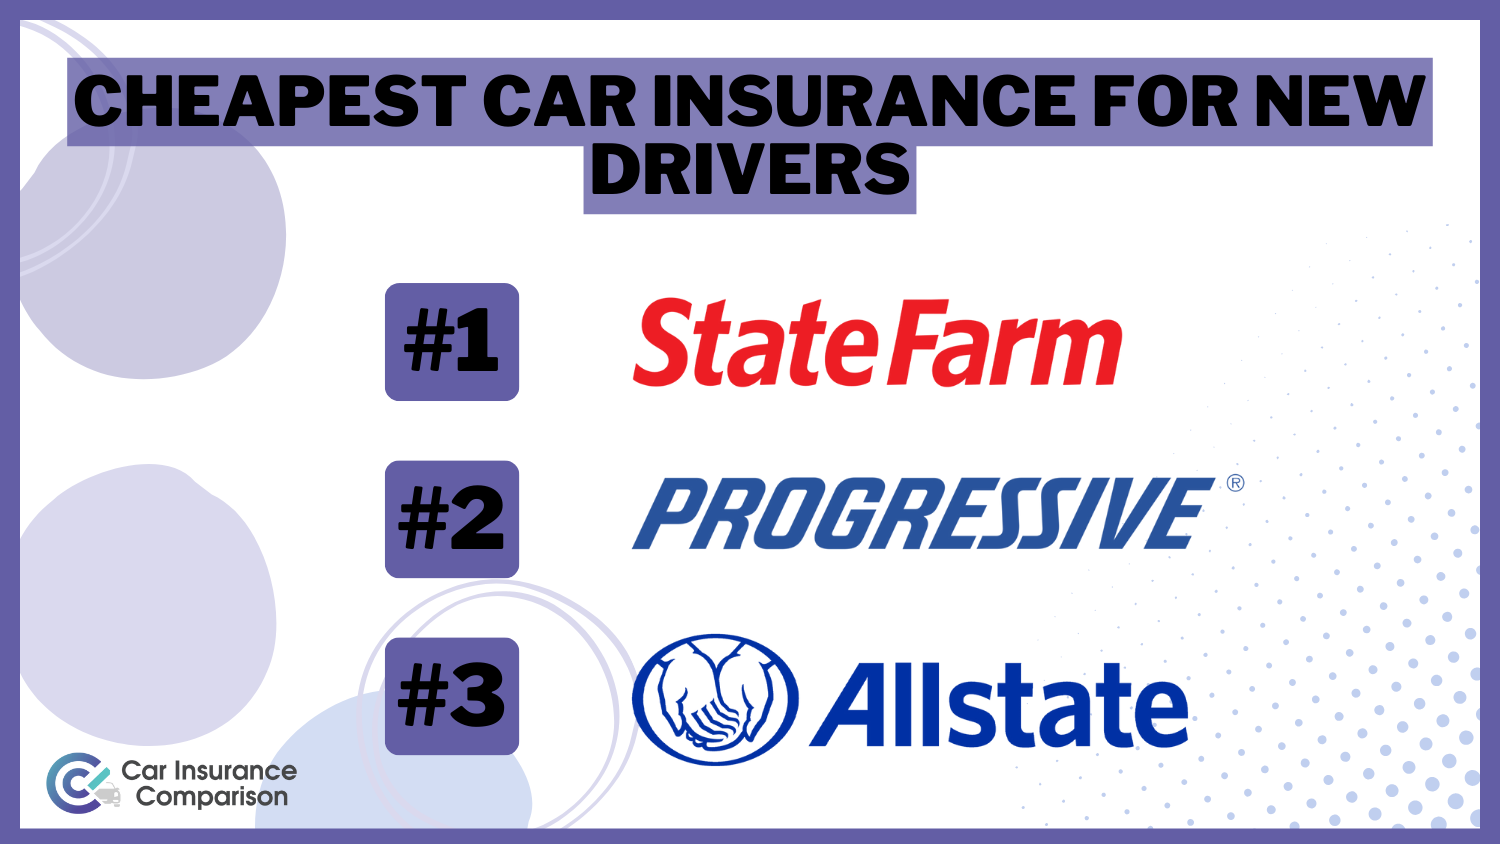 Cheapest Car Insurance for New Drivers: State Farm, Progressive, and Allstate